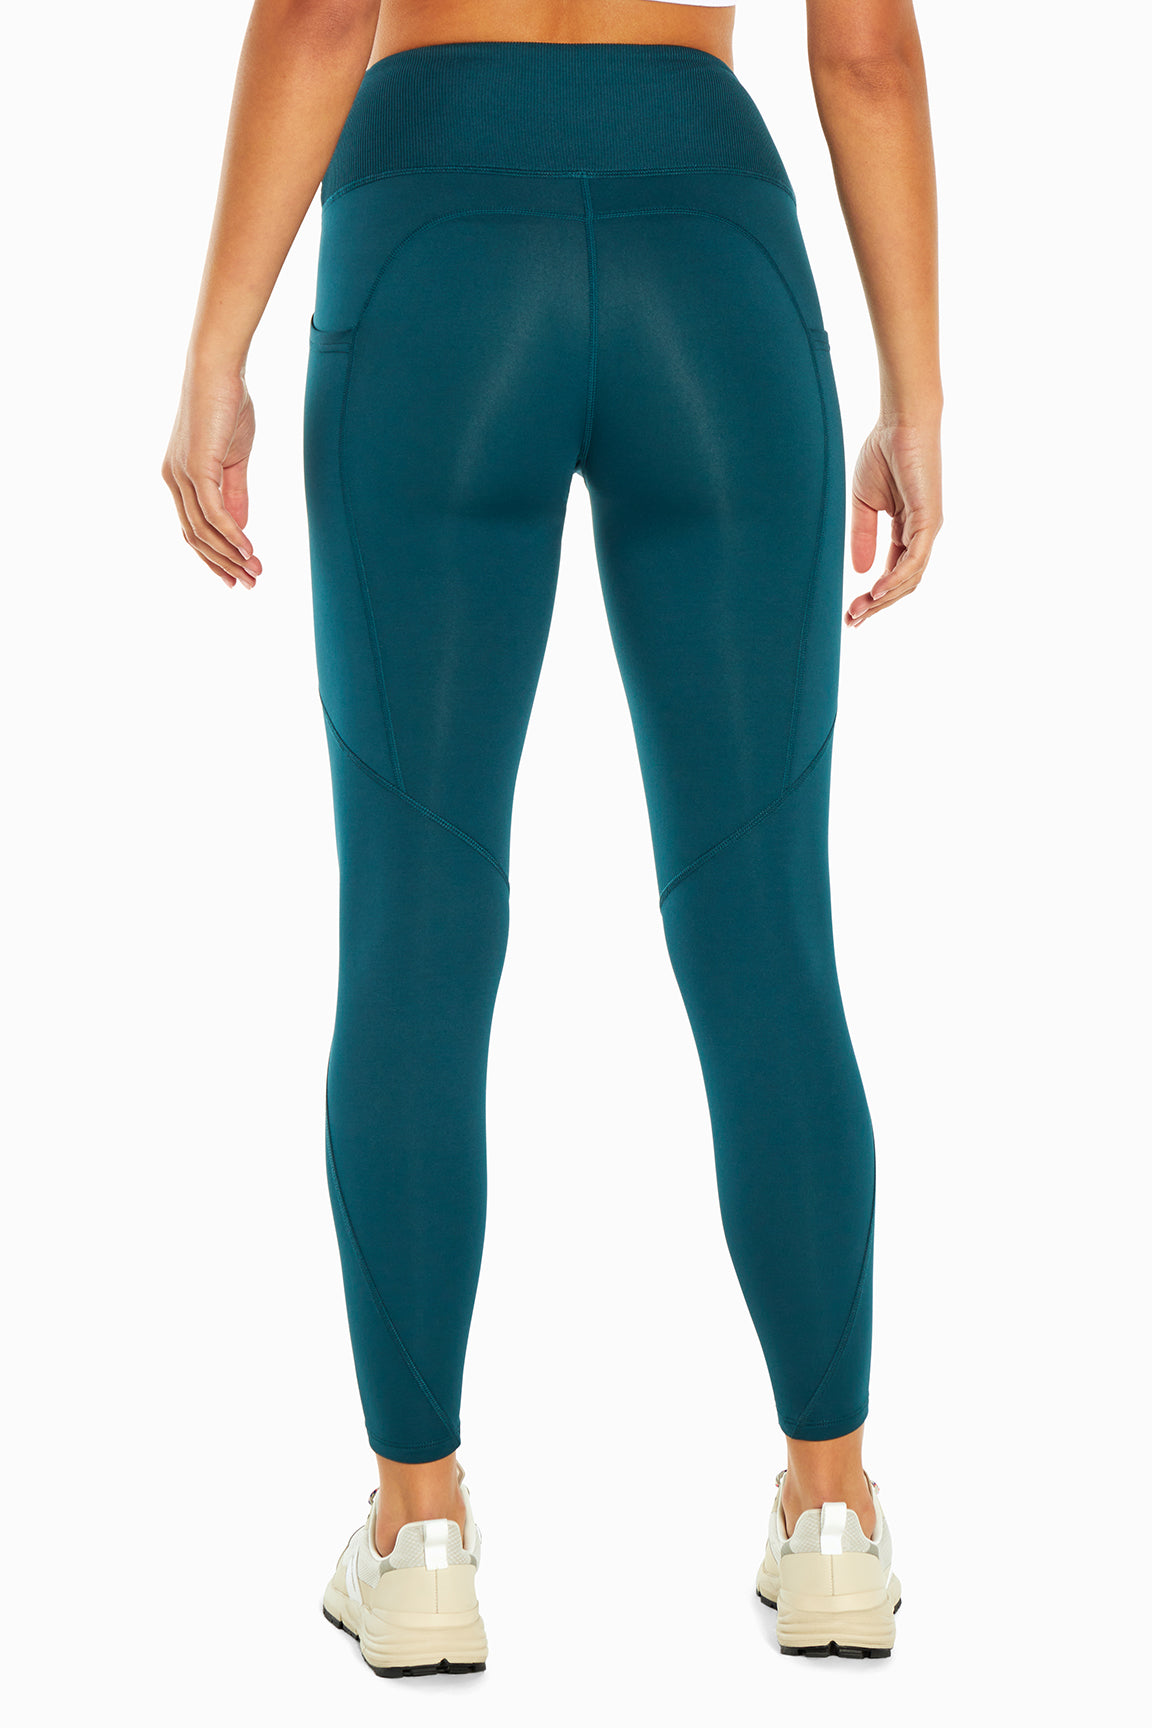 HOMME Active - Check out this product 😀Marika Talia Pocket Leggings -  Women Deep Cobalt😀 by handsandhead starting at Tk 1250.00. Order now